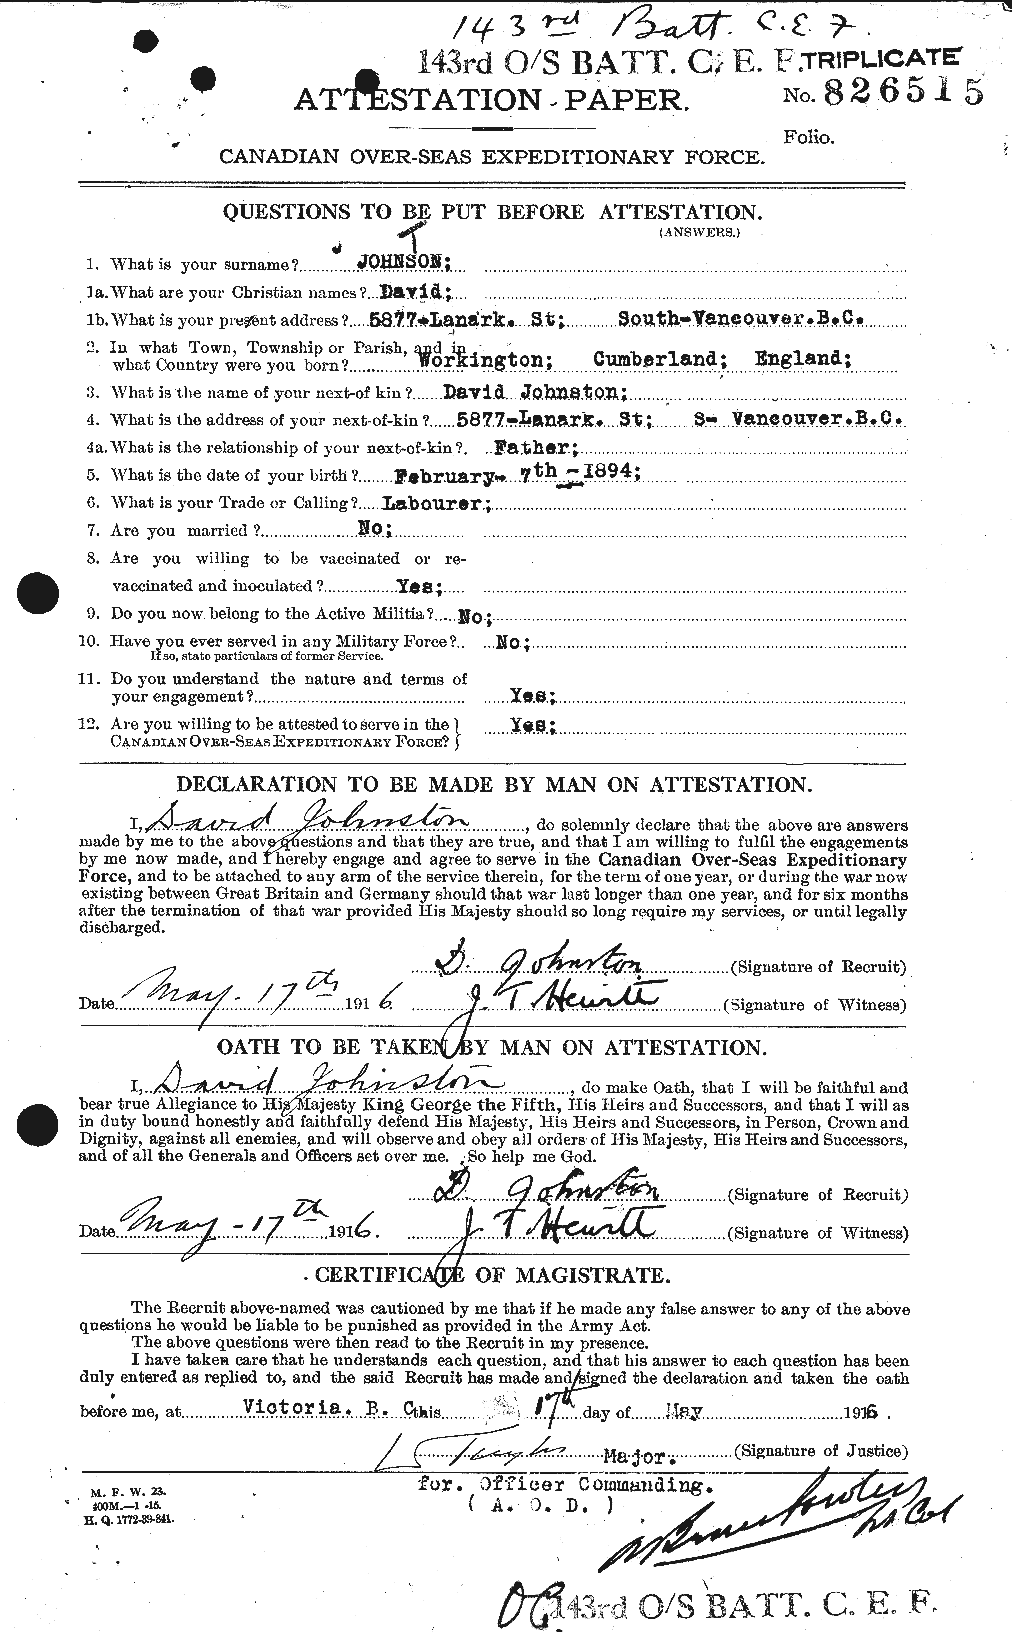 Personnel Records of the First World War - CEF 423154a